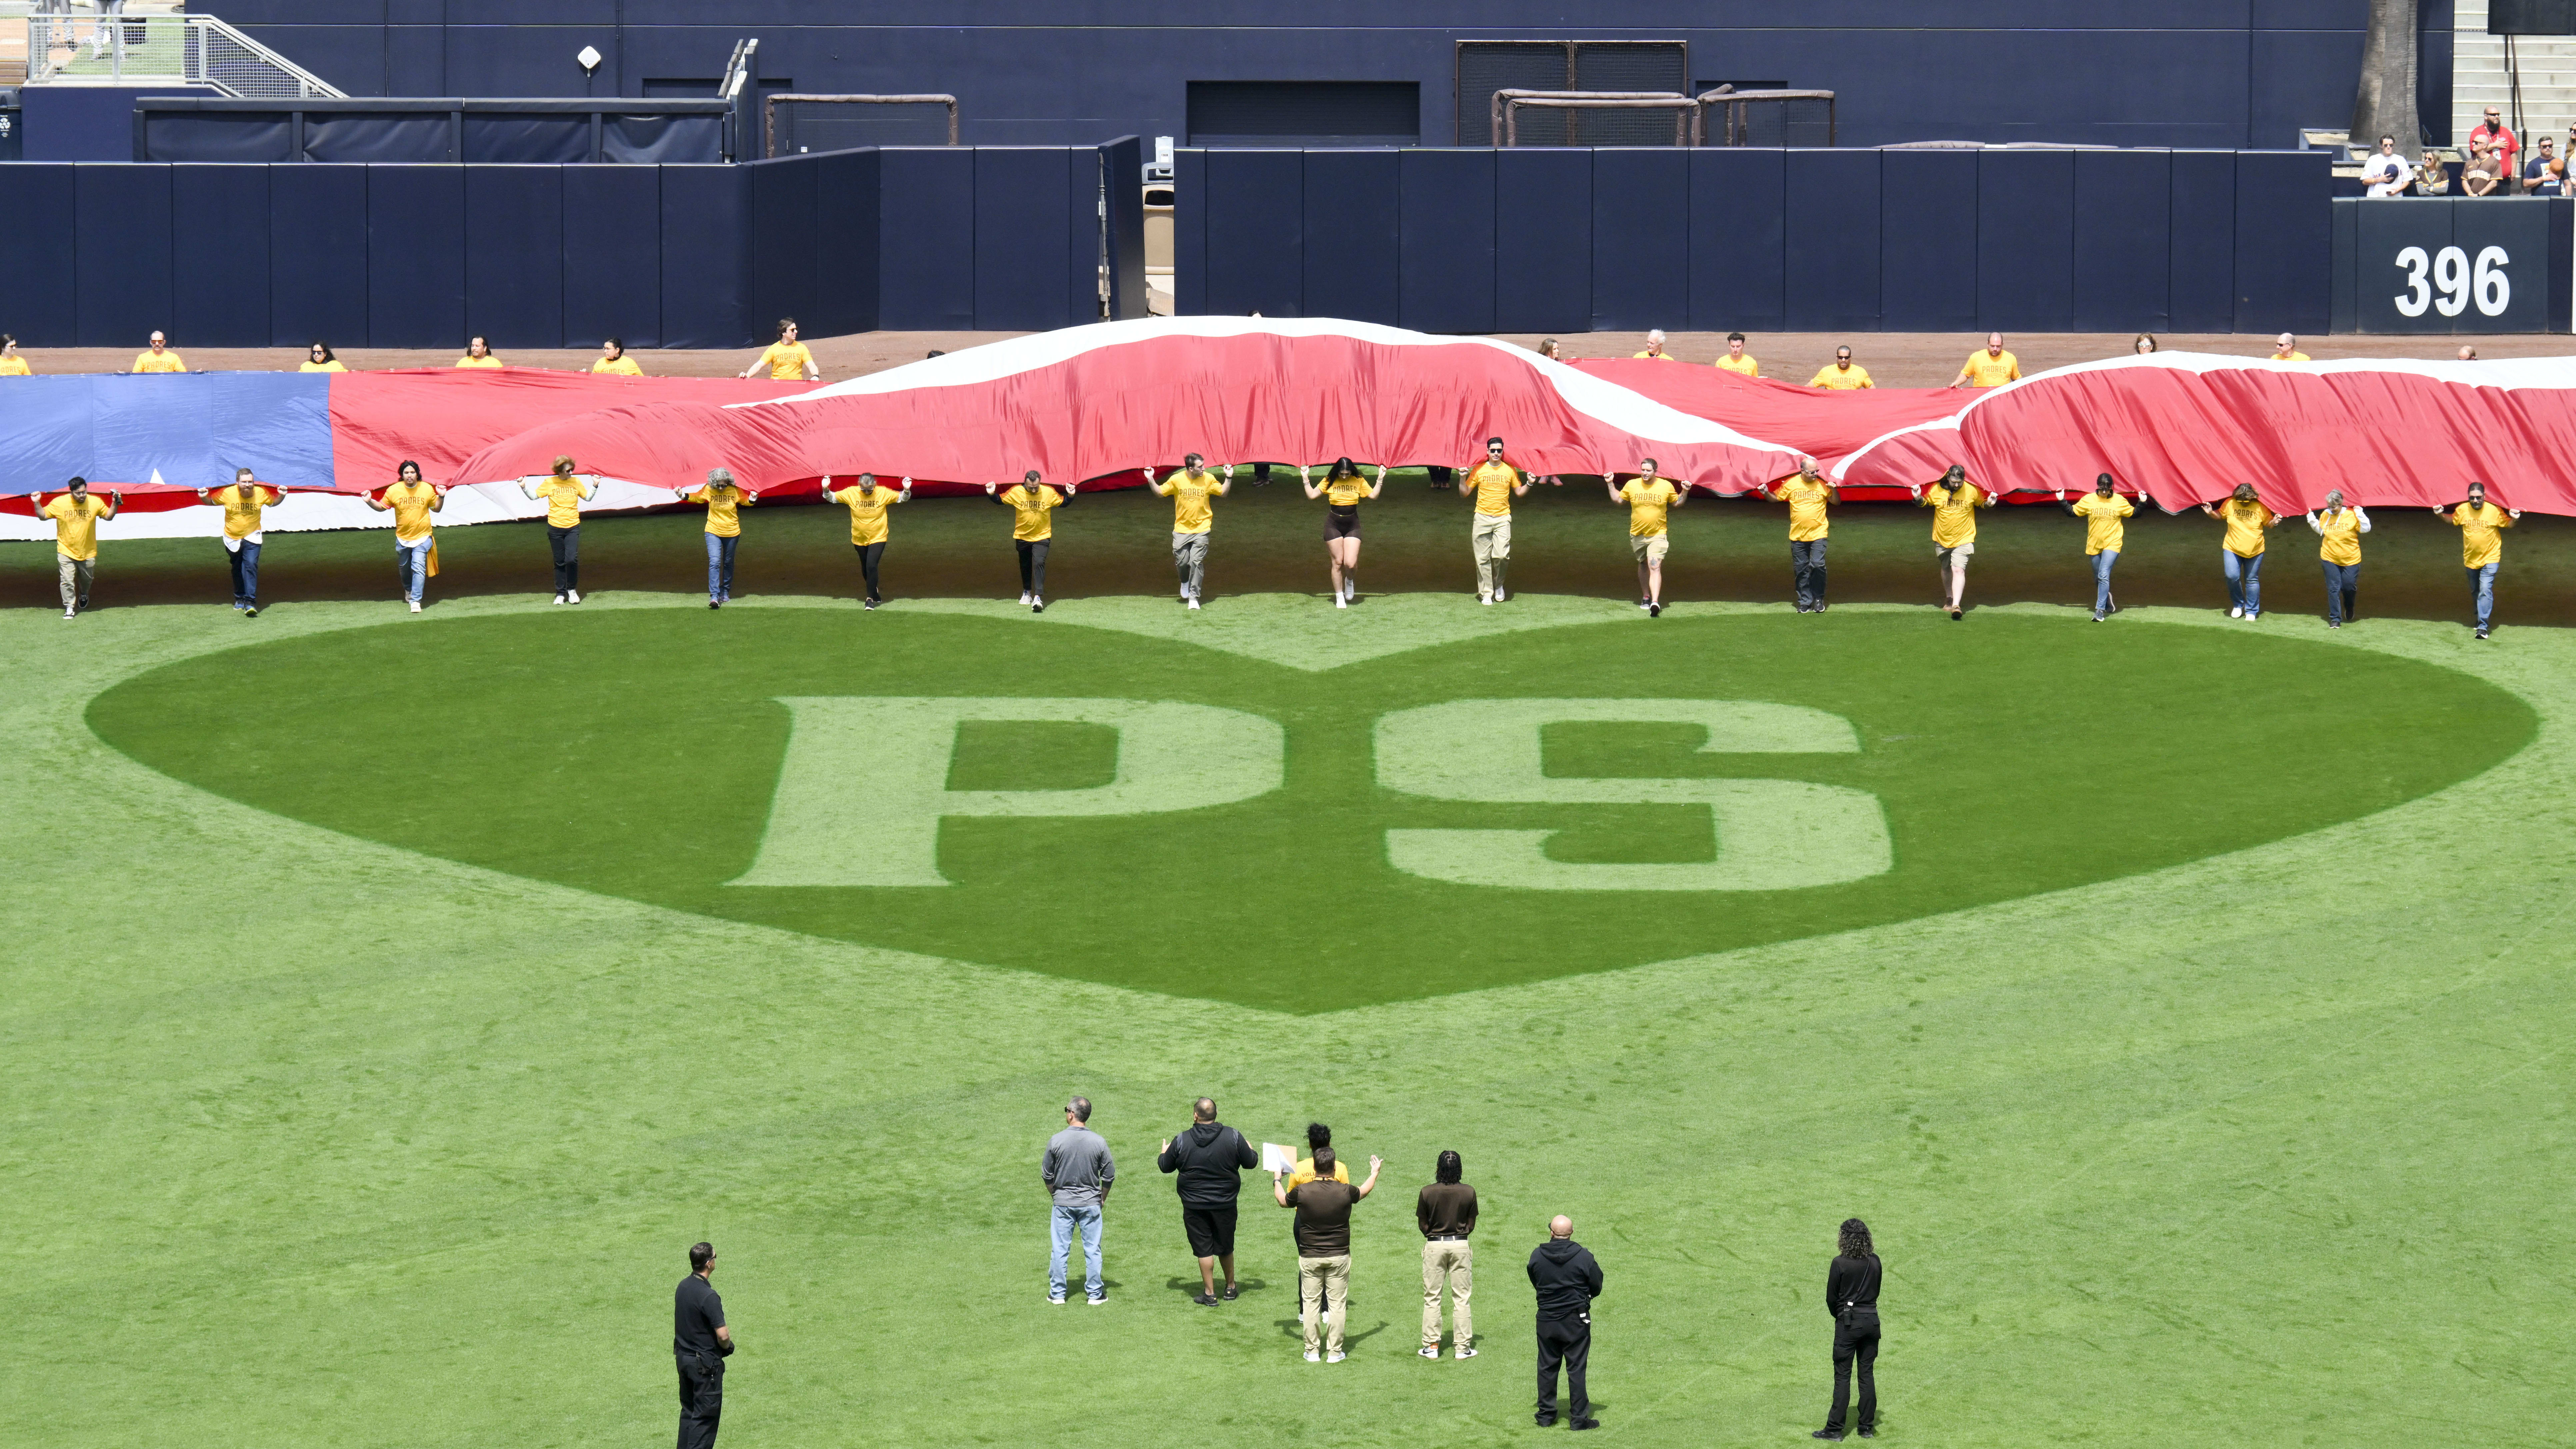 The Padres paid tribute to late owner Peter Seidler before their home opener